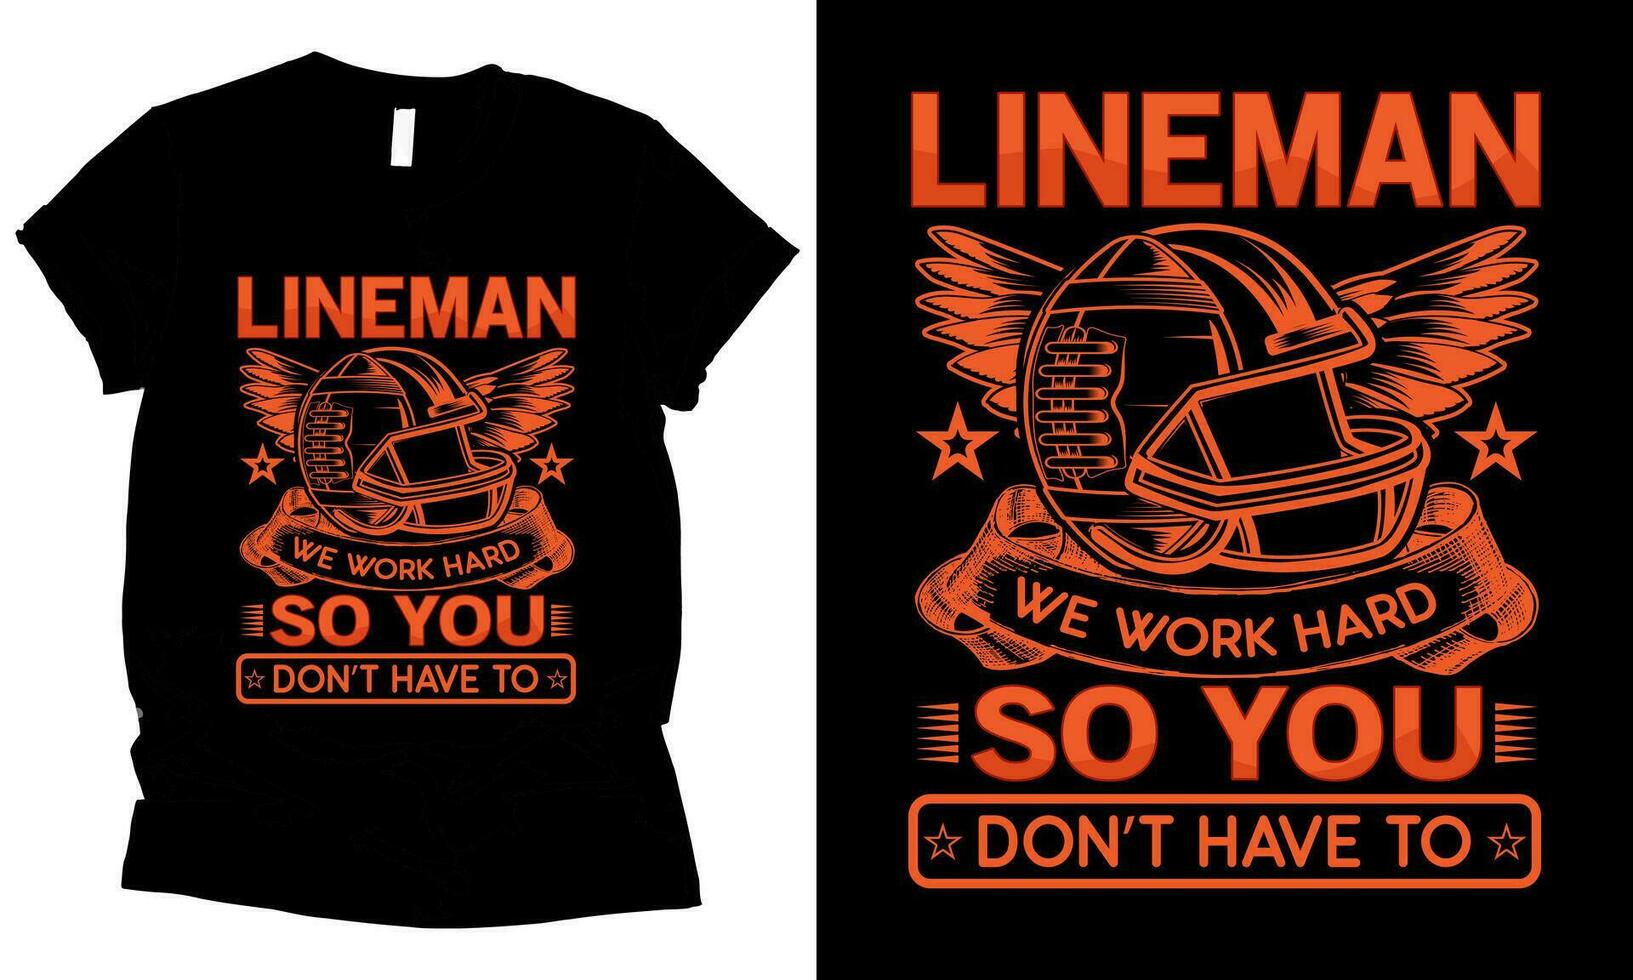 Line we work hard so you do not have to t-shirt design vector